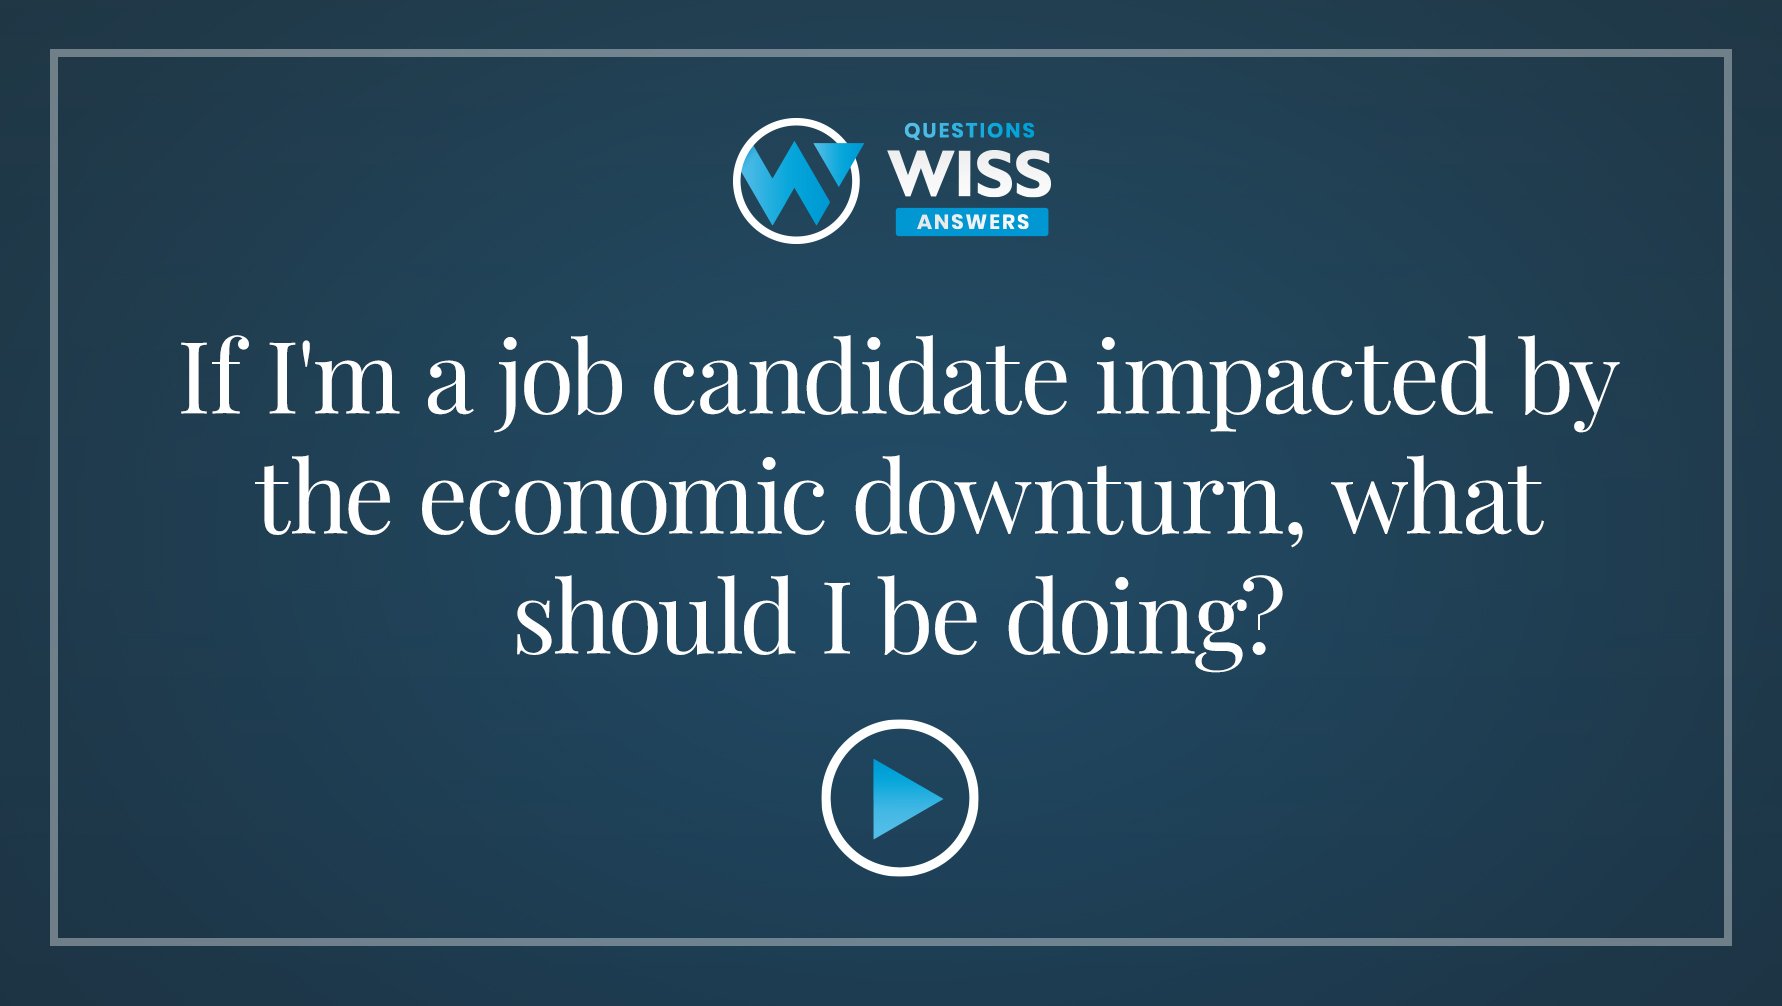 If I’m a job candidate impacted by the economic downturn, what should I be doing?